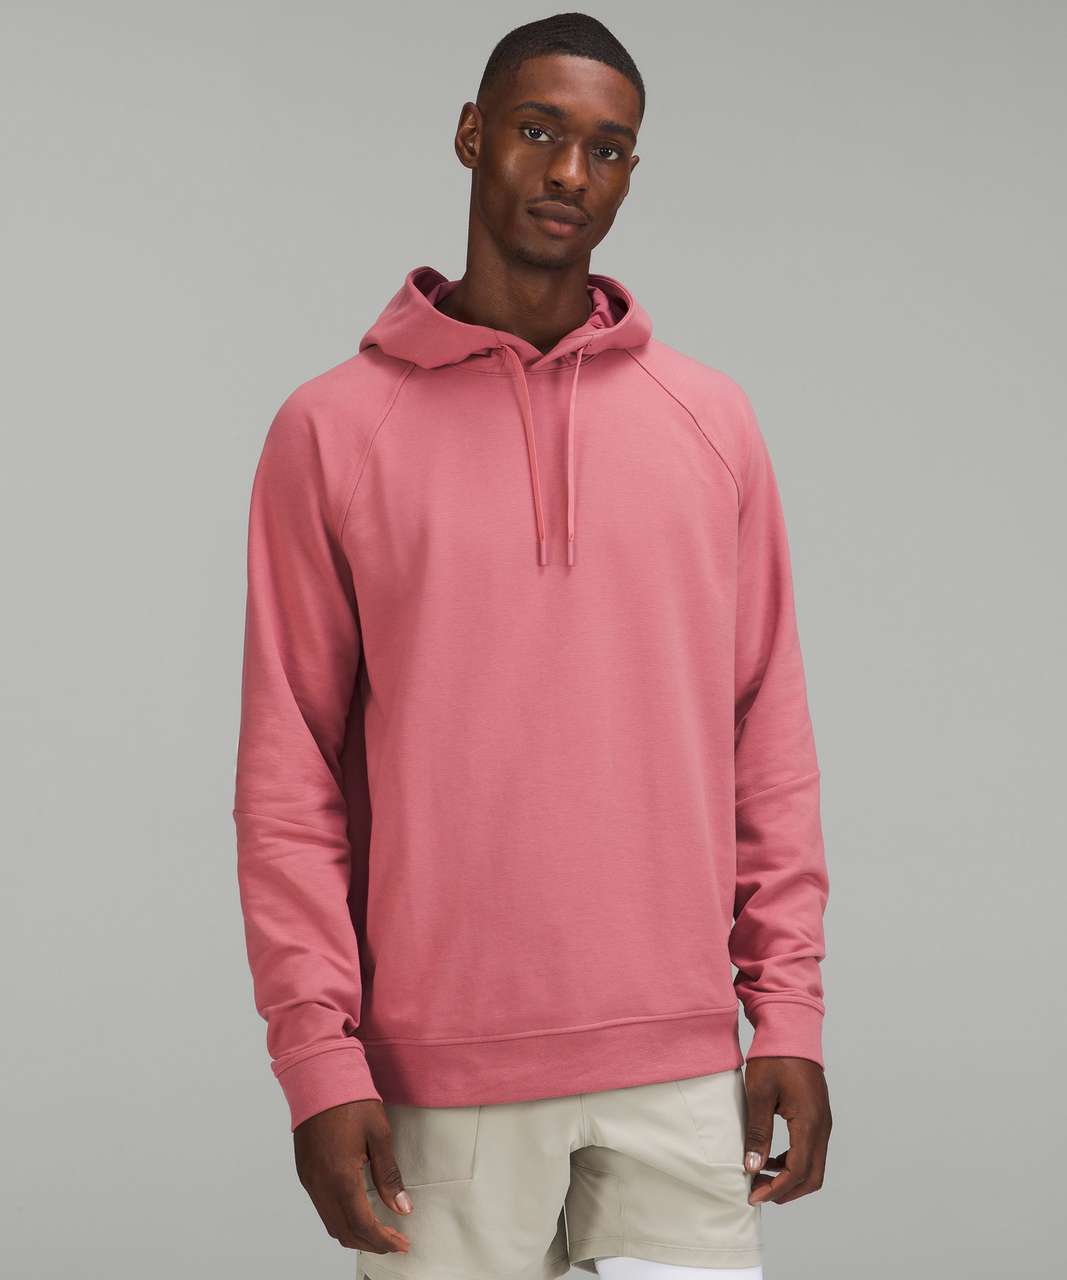 Lululemon City Sweat Pullover Hoodie French Terry - Brier Rose